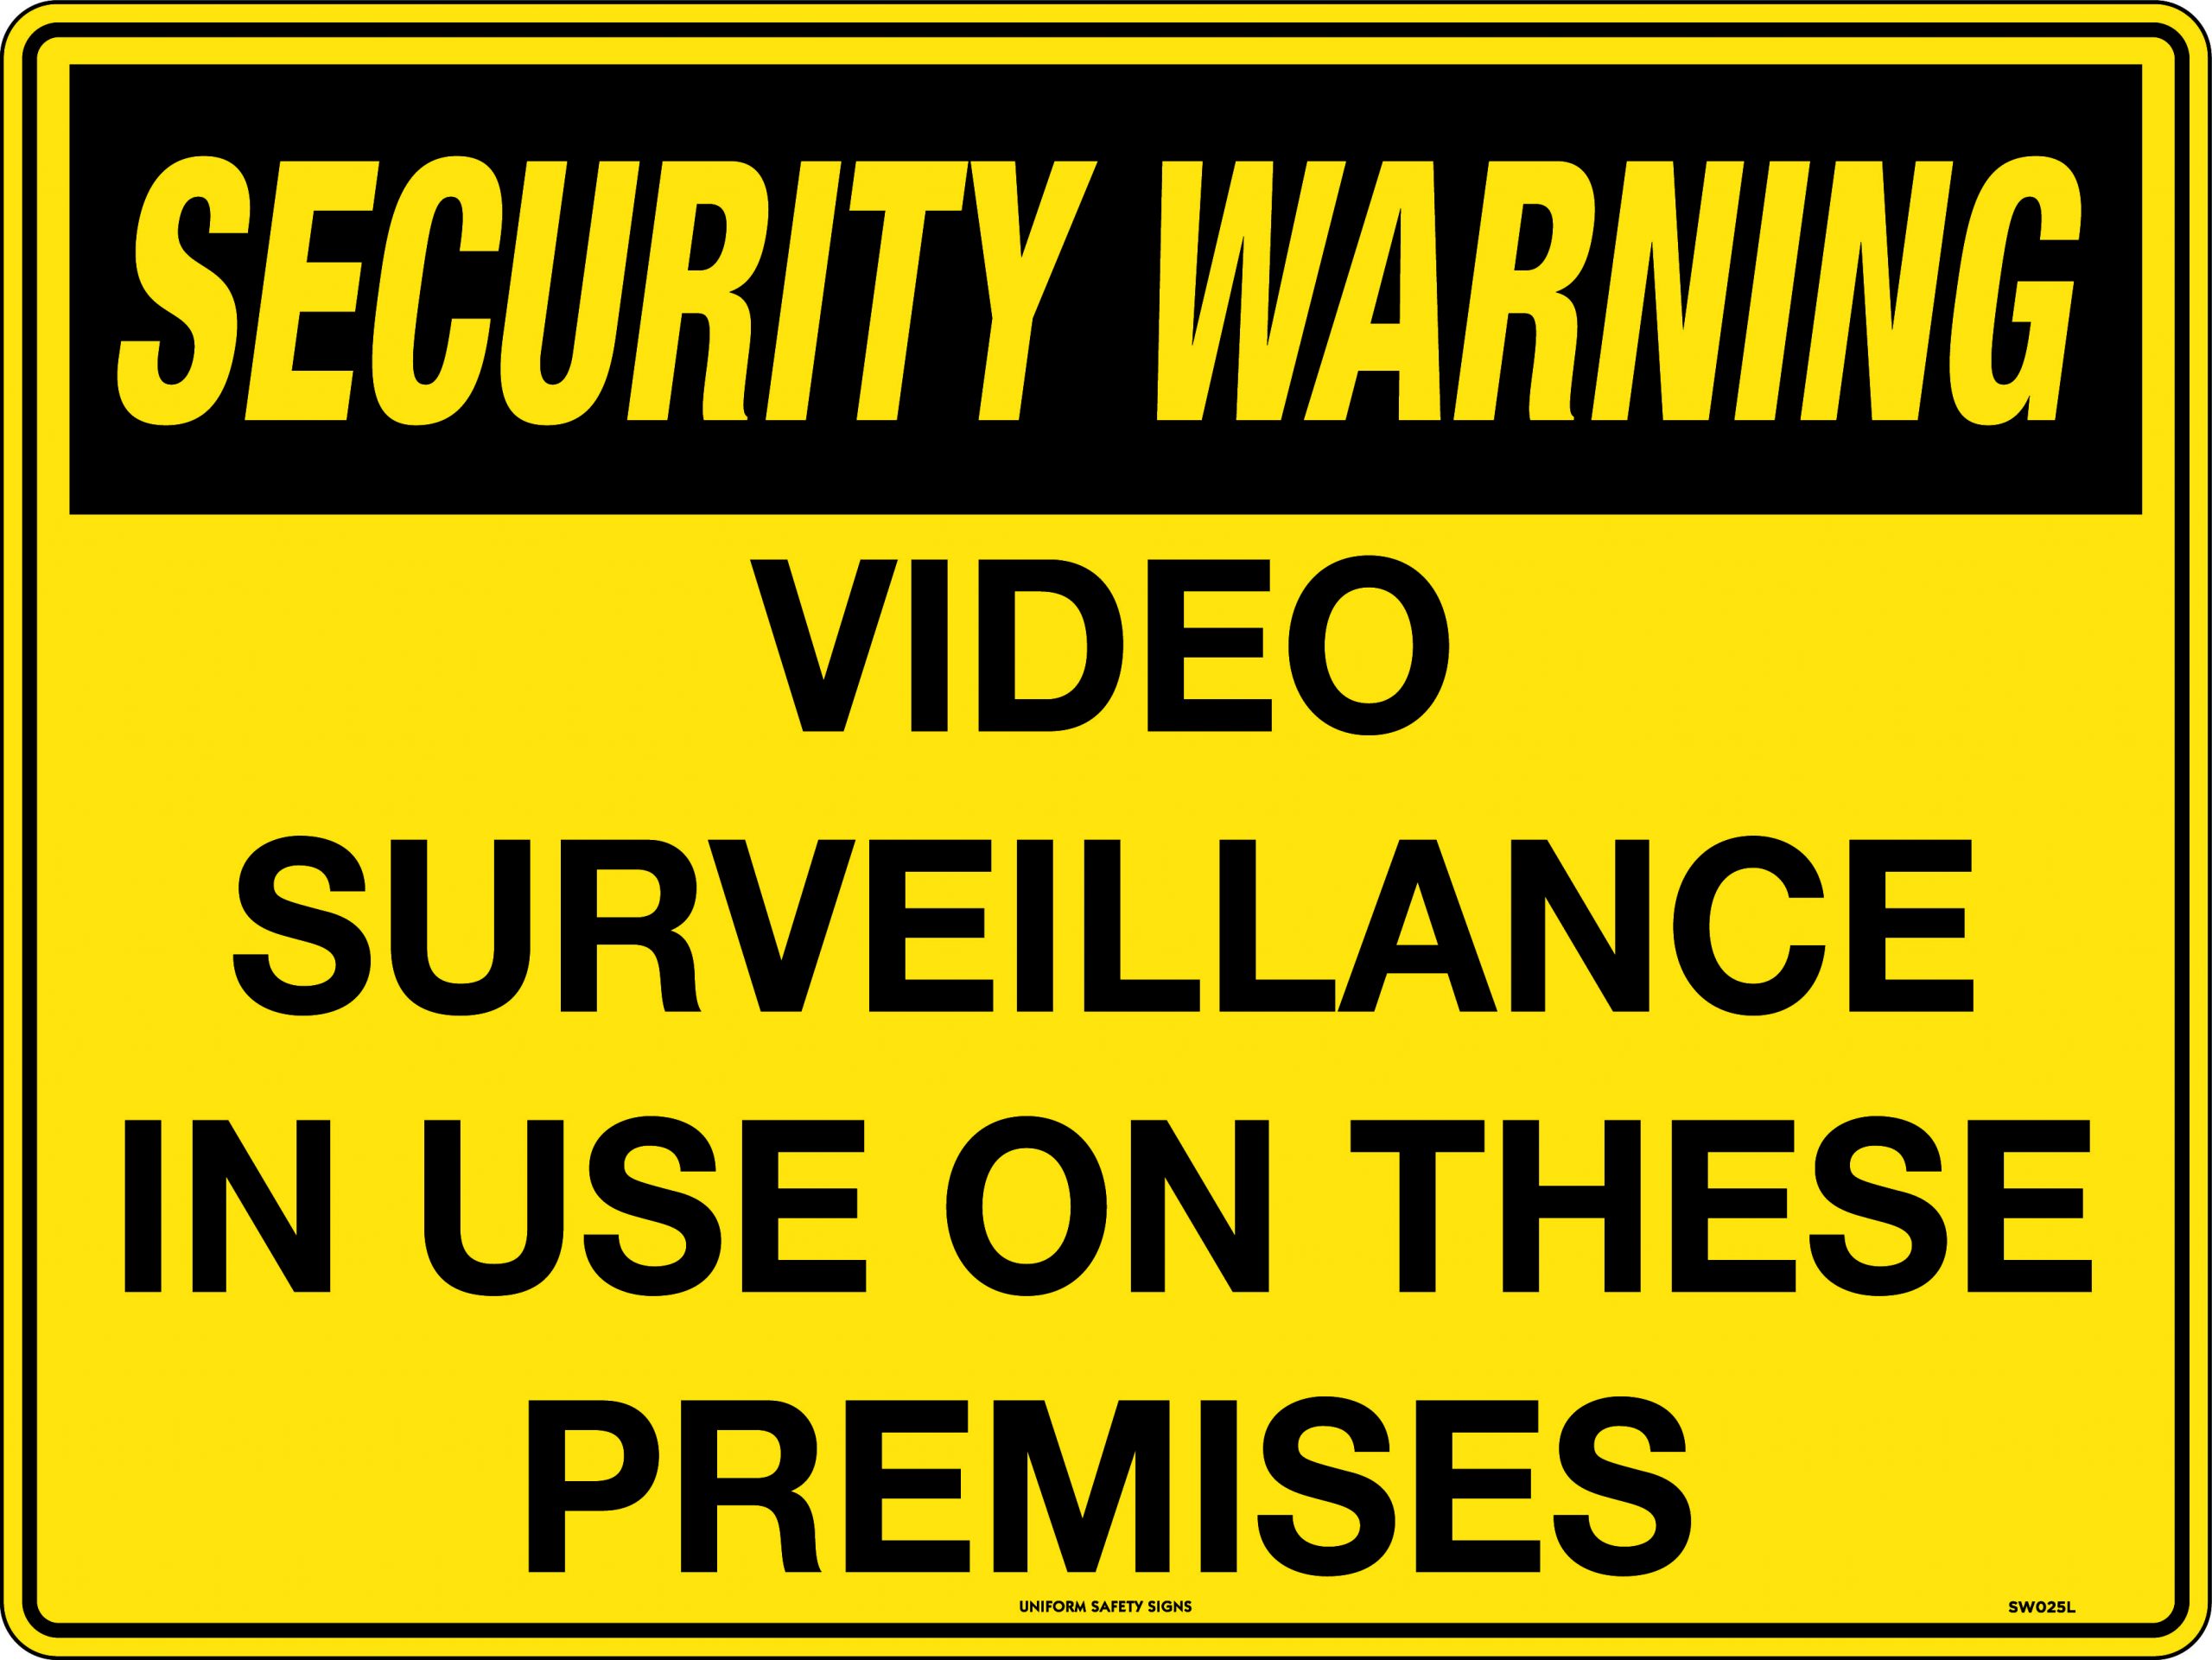 SIGN 450 X 300 METAL SECURITY WARNING VIDEO SURVEILLANCE IN USE